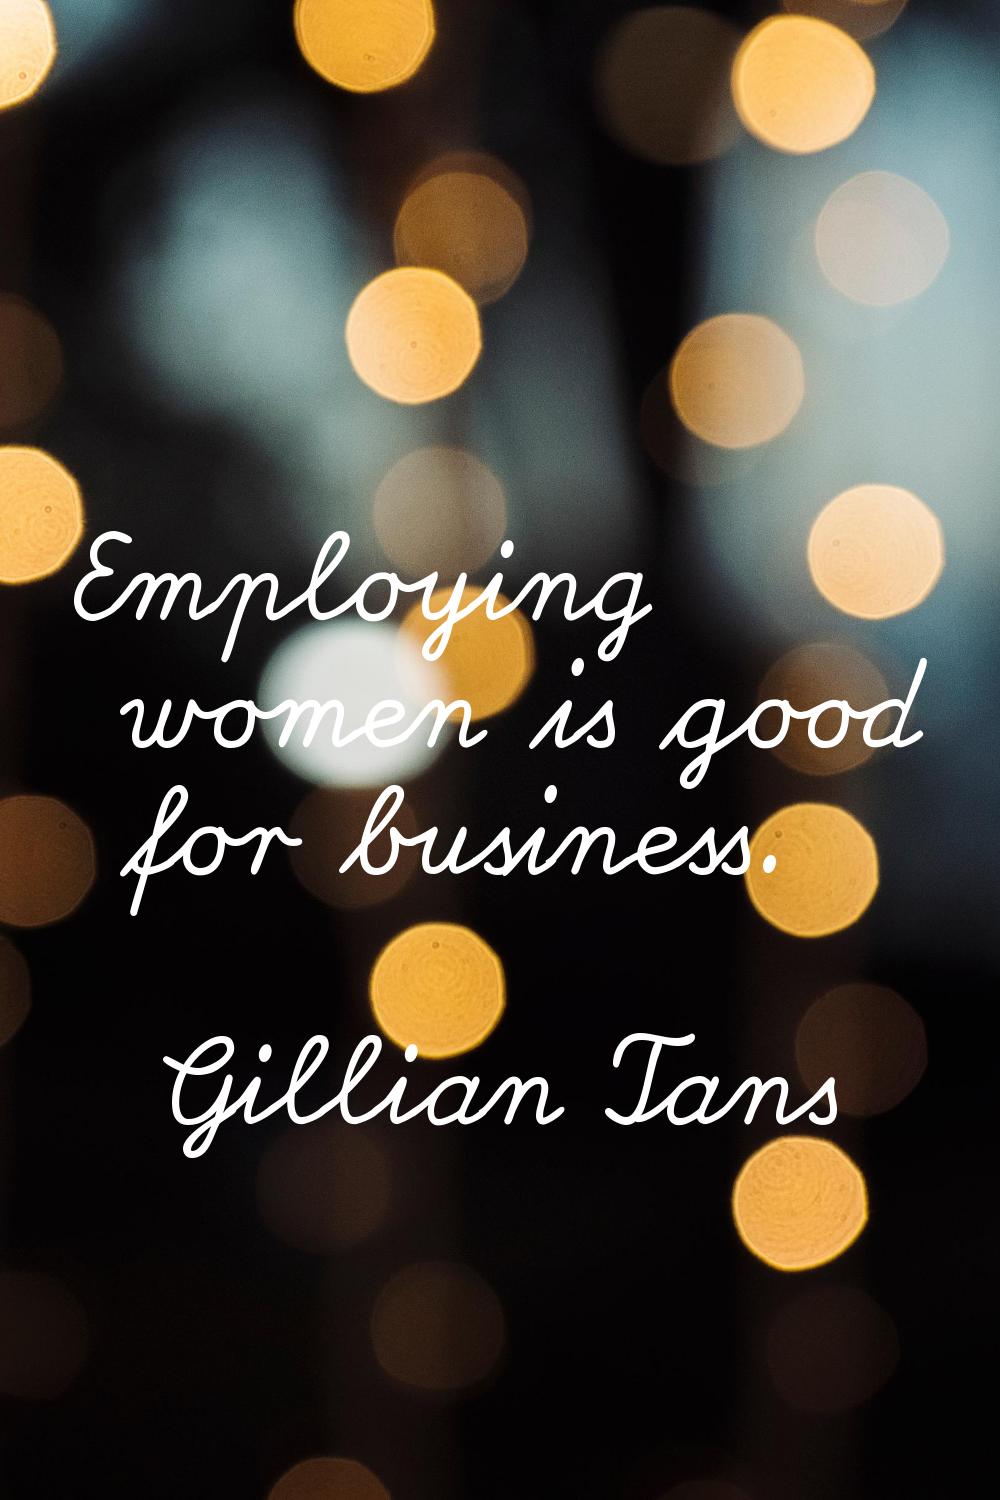 Employing women is good for business.